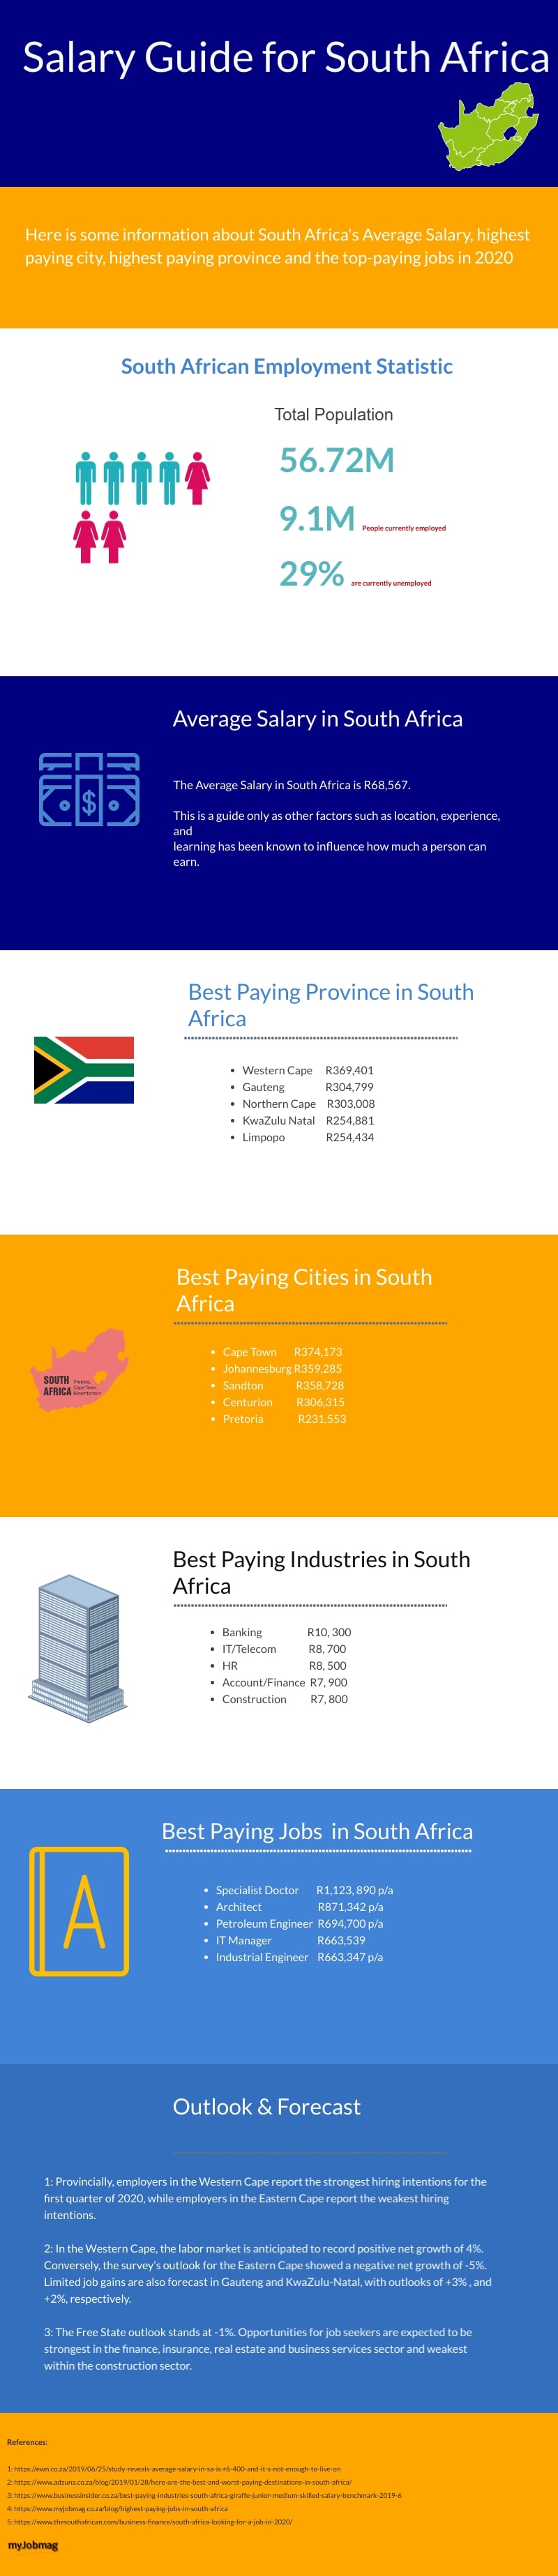 2020 salary guide for south africa